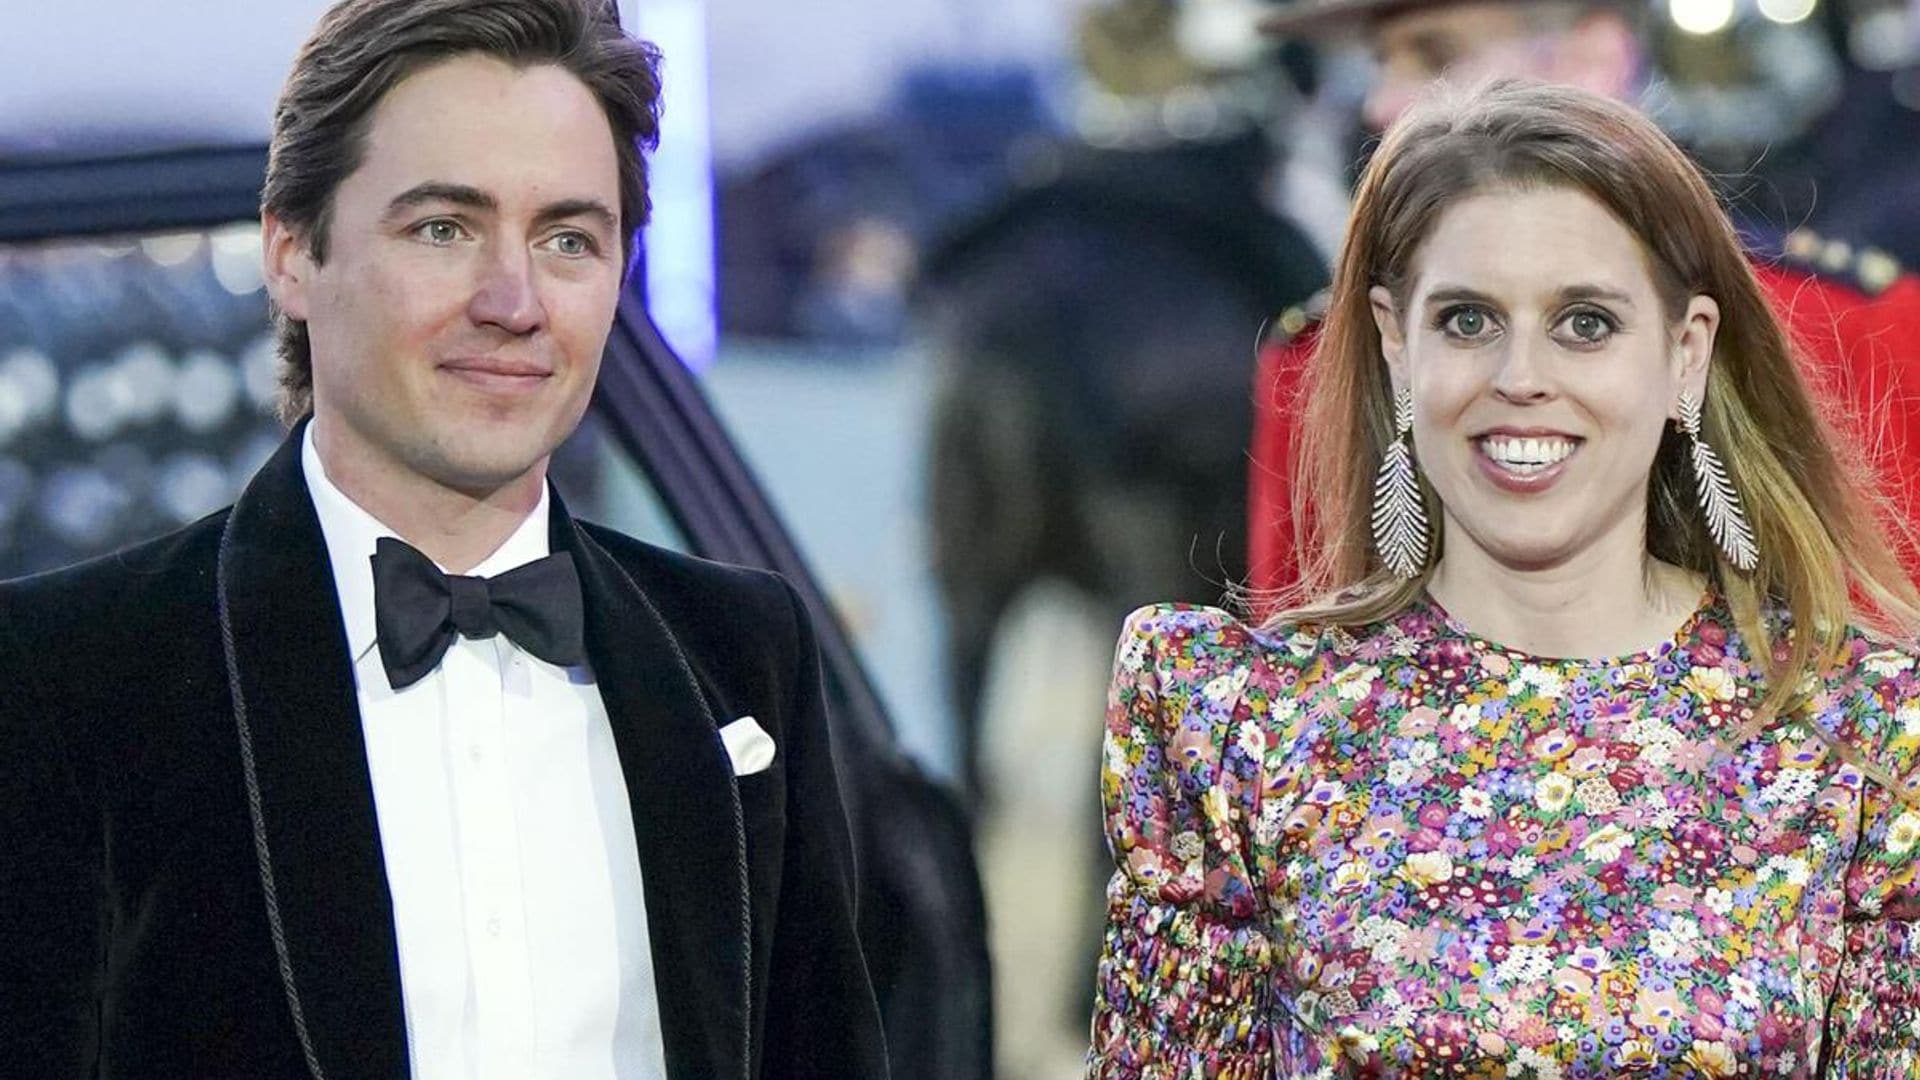 Princess Beatrice and Edo attend preview of Platinum Jubilee celebration